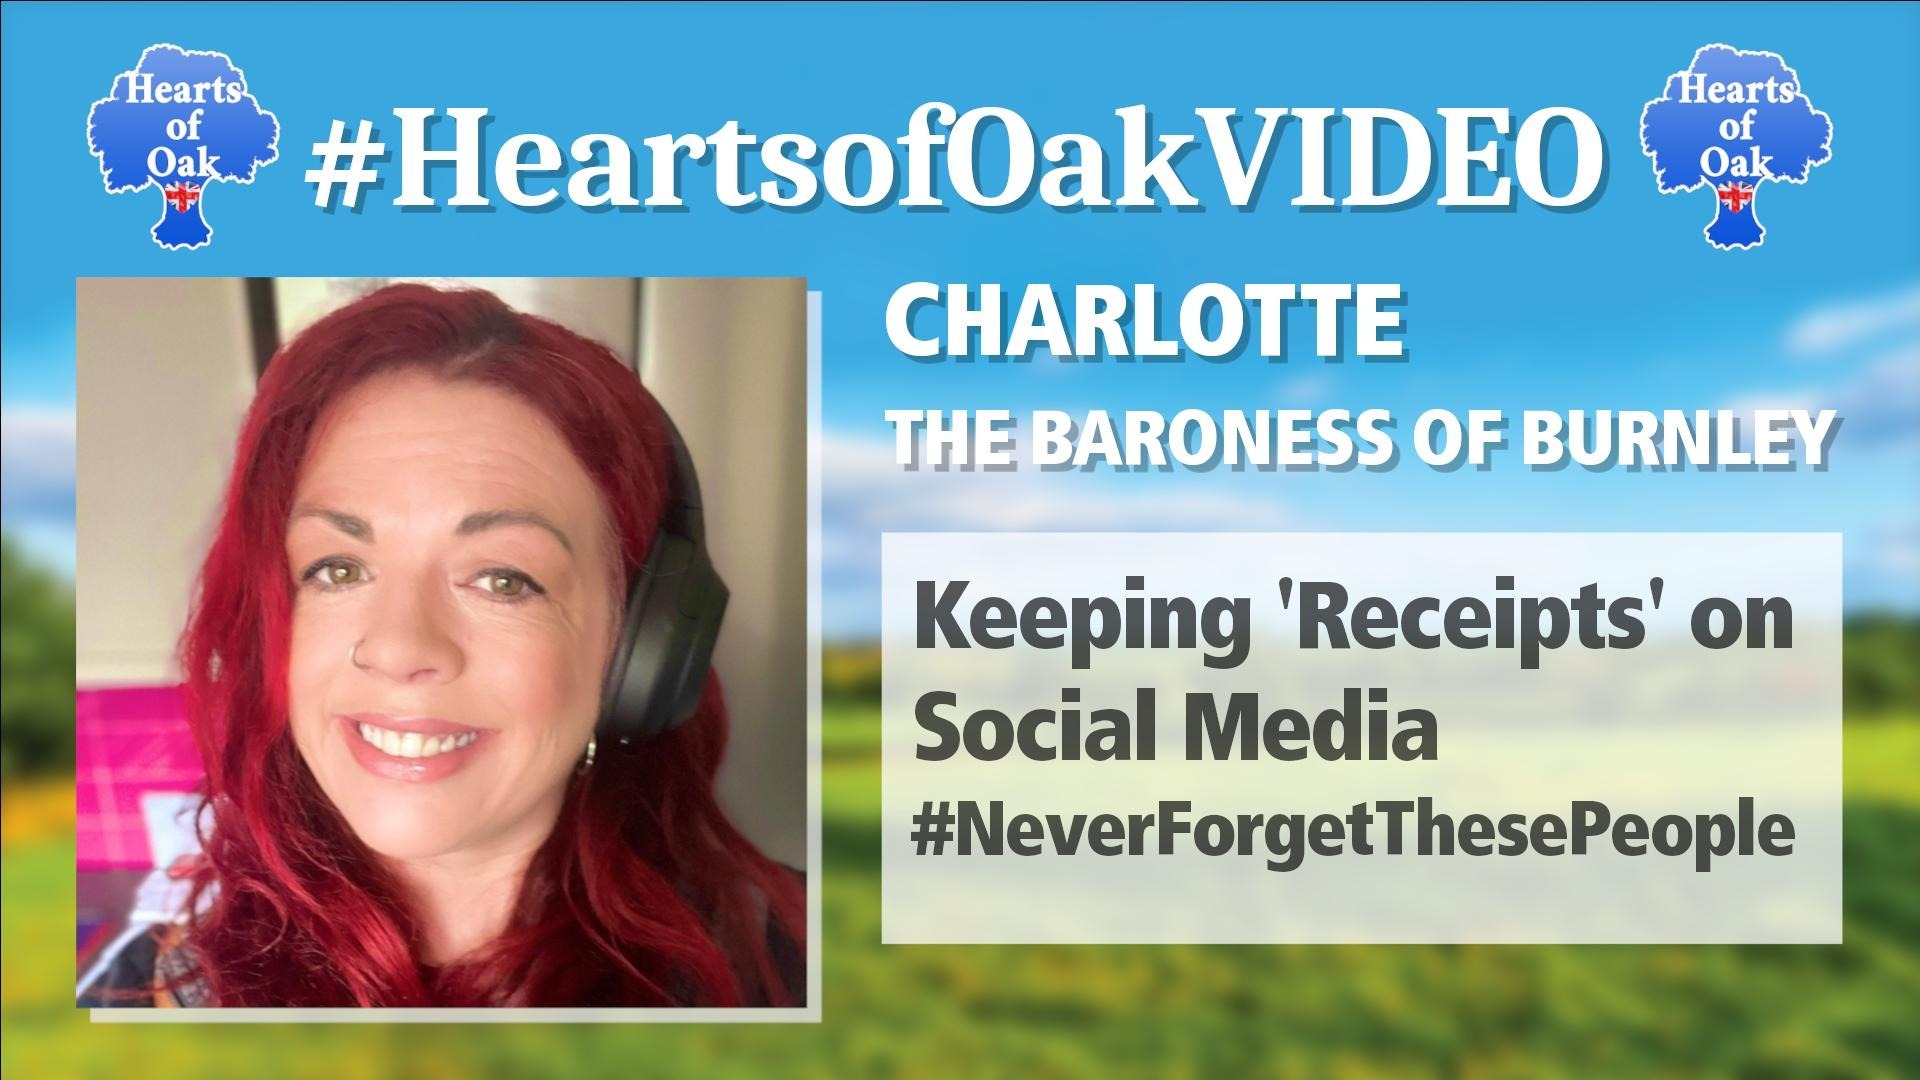 Charlotte The Baroness of Burnley - Keeping Receipts on Social Media #NeverForgetThesePeople